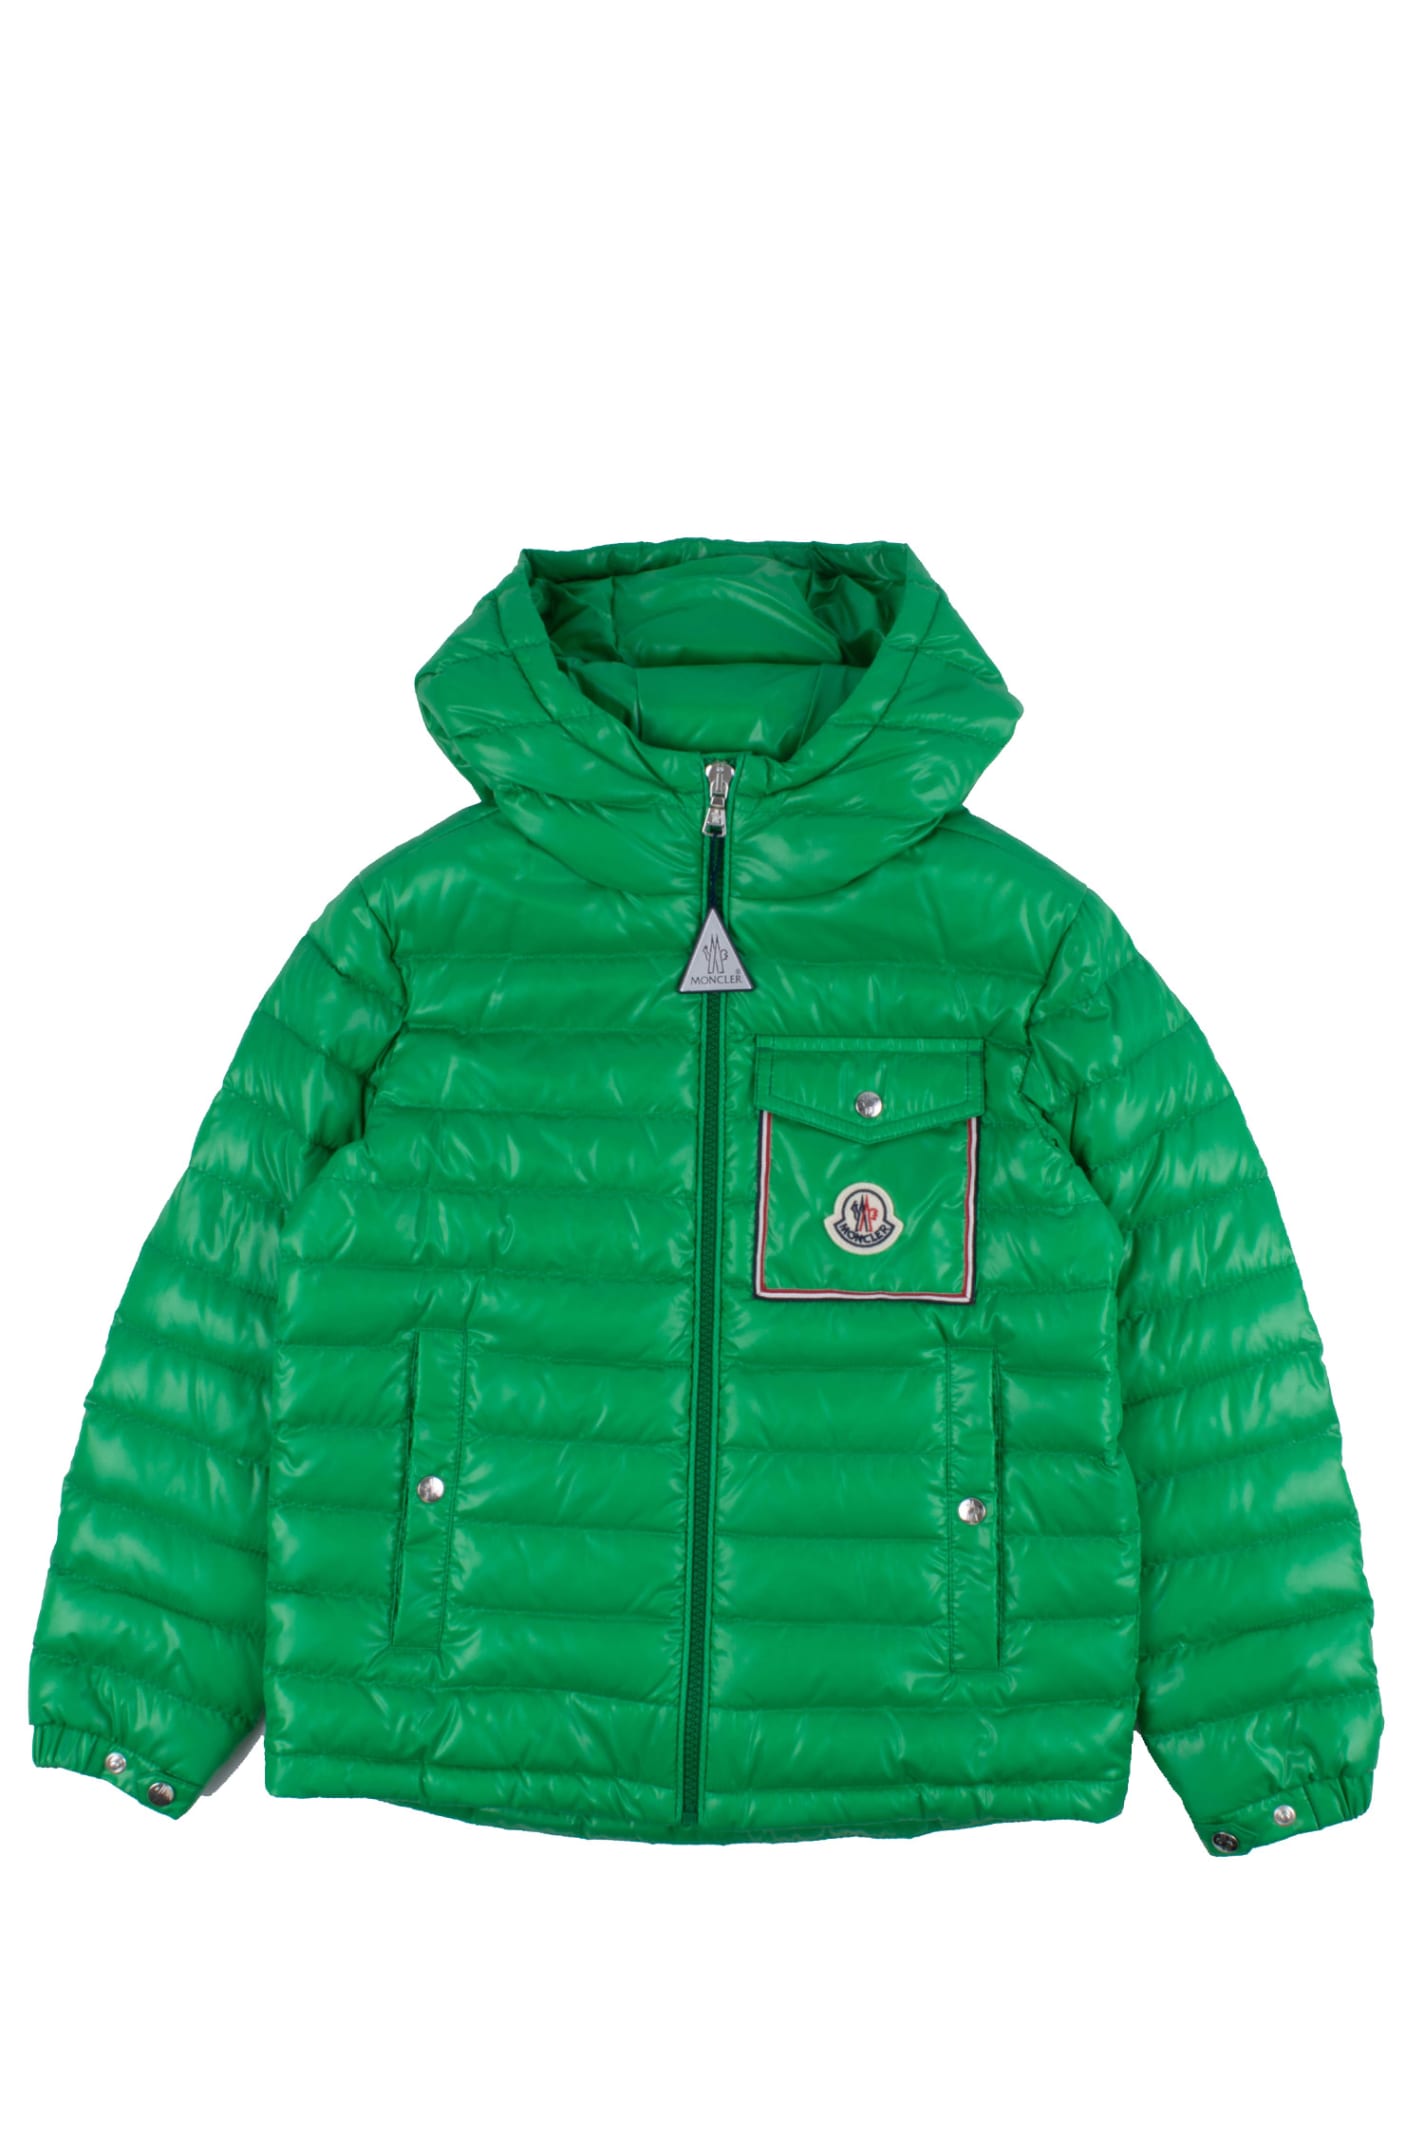 MONCLER Kids On Sale, Up To 70% Off | ModeSens